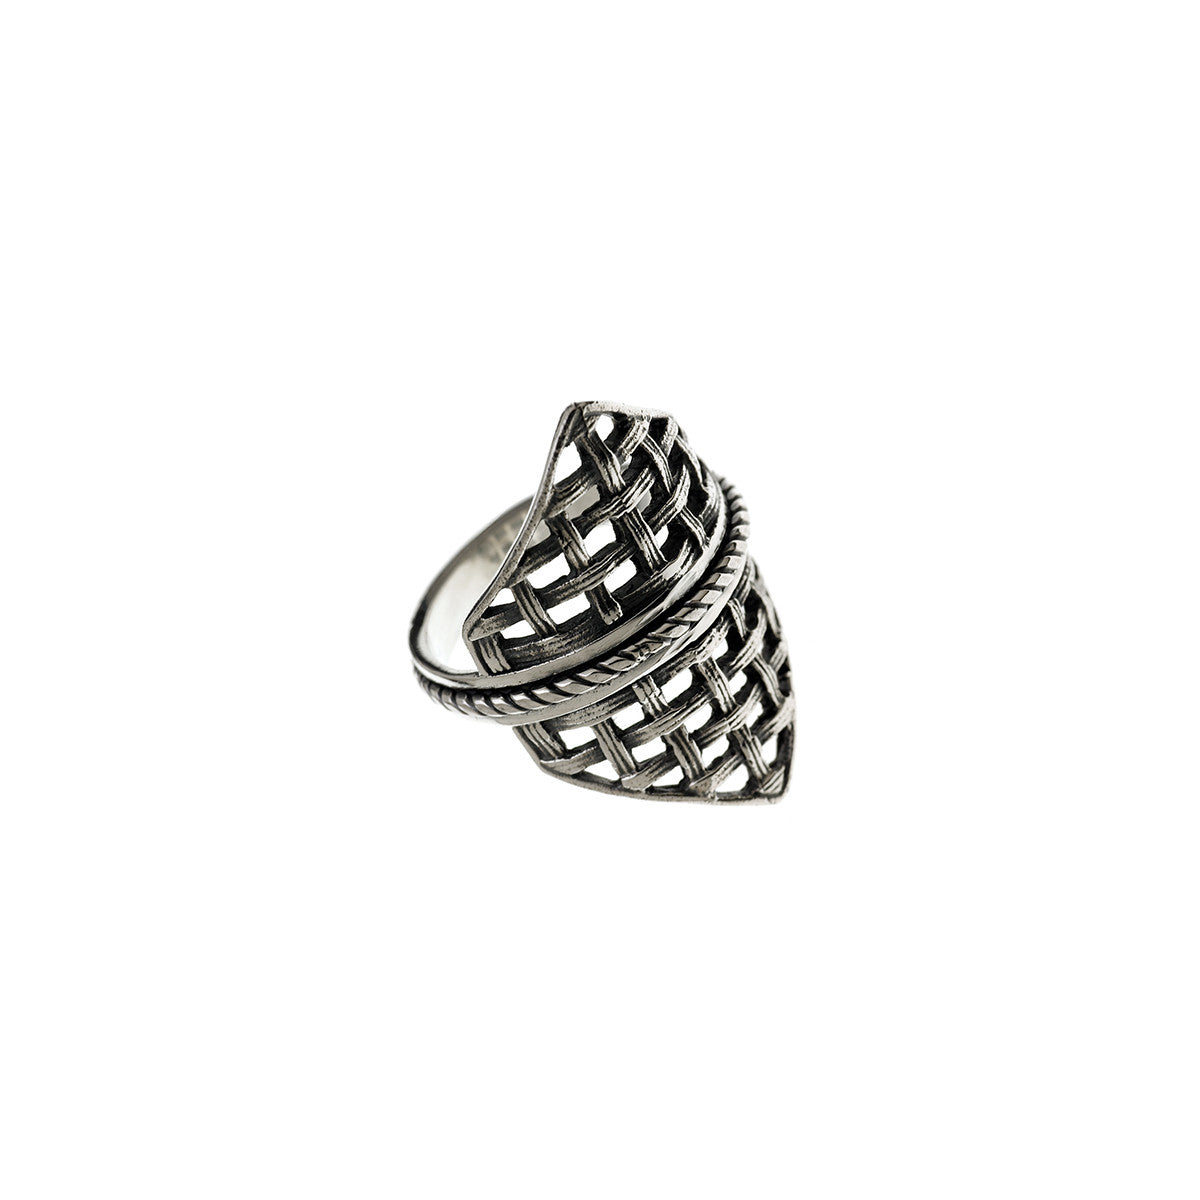 Cool Mesh Embroidered Sterling Silver Spin Ring - Cynthia Gale New York Jewelry